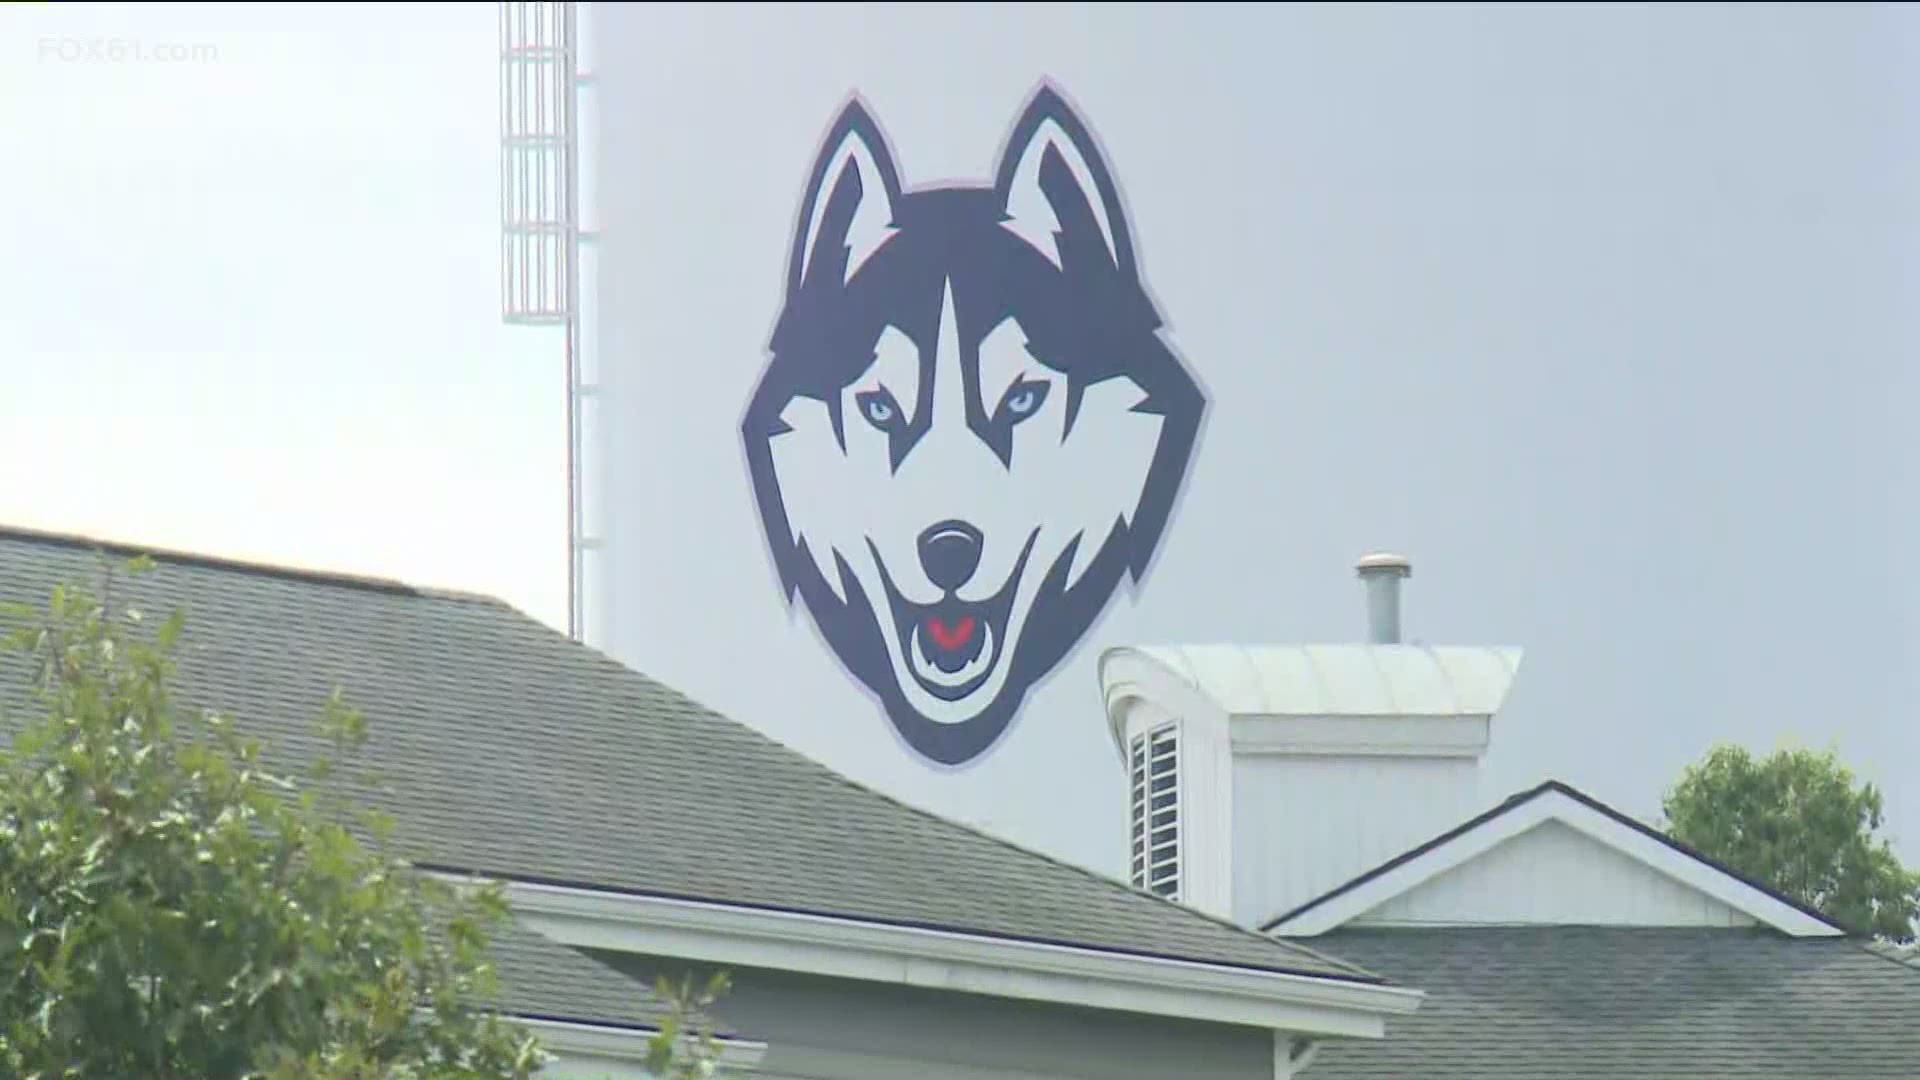 UConn students say they're pumped for the Sweet 16 match-up against Arkansas.